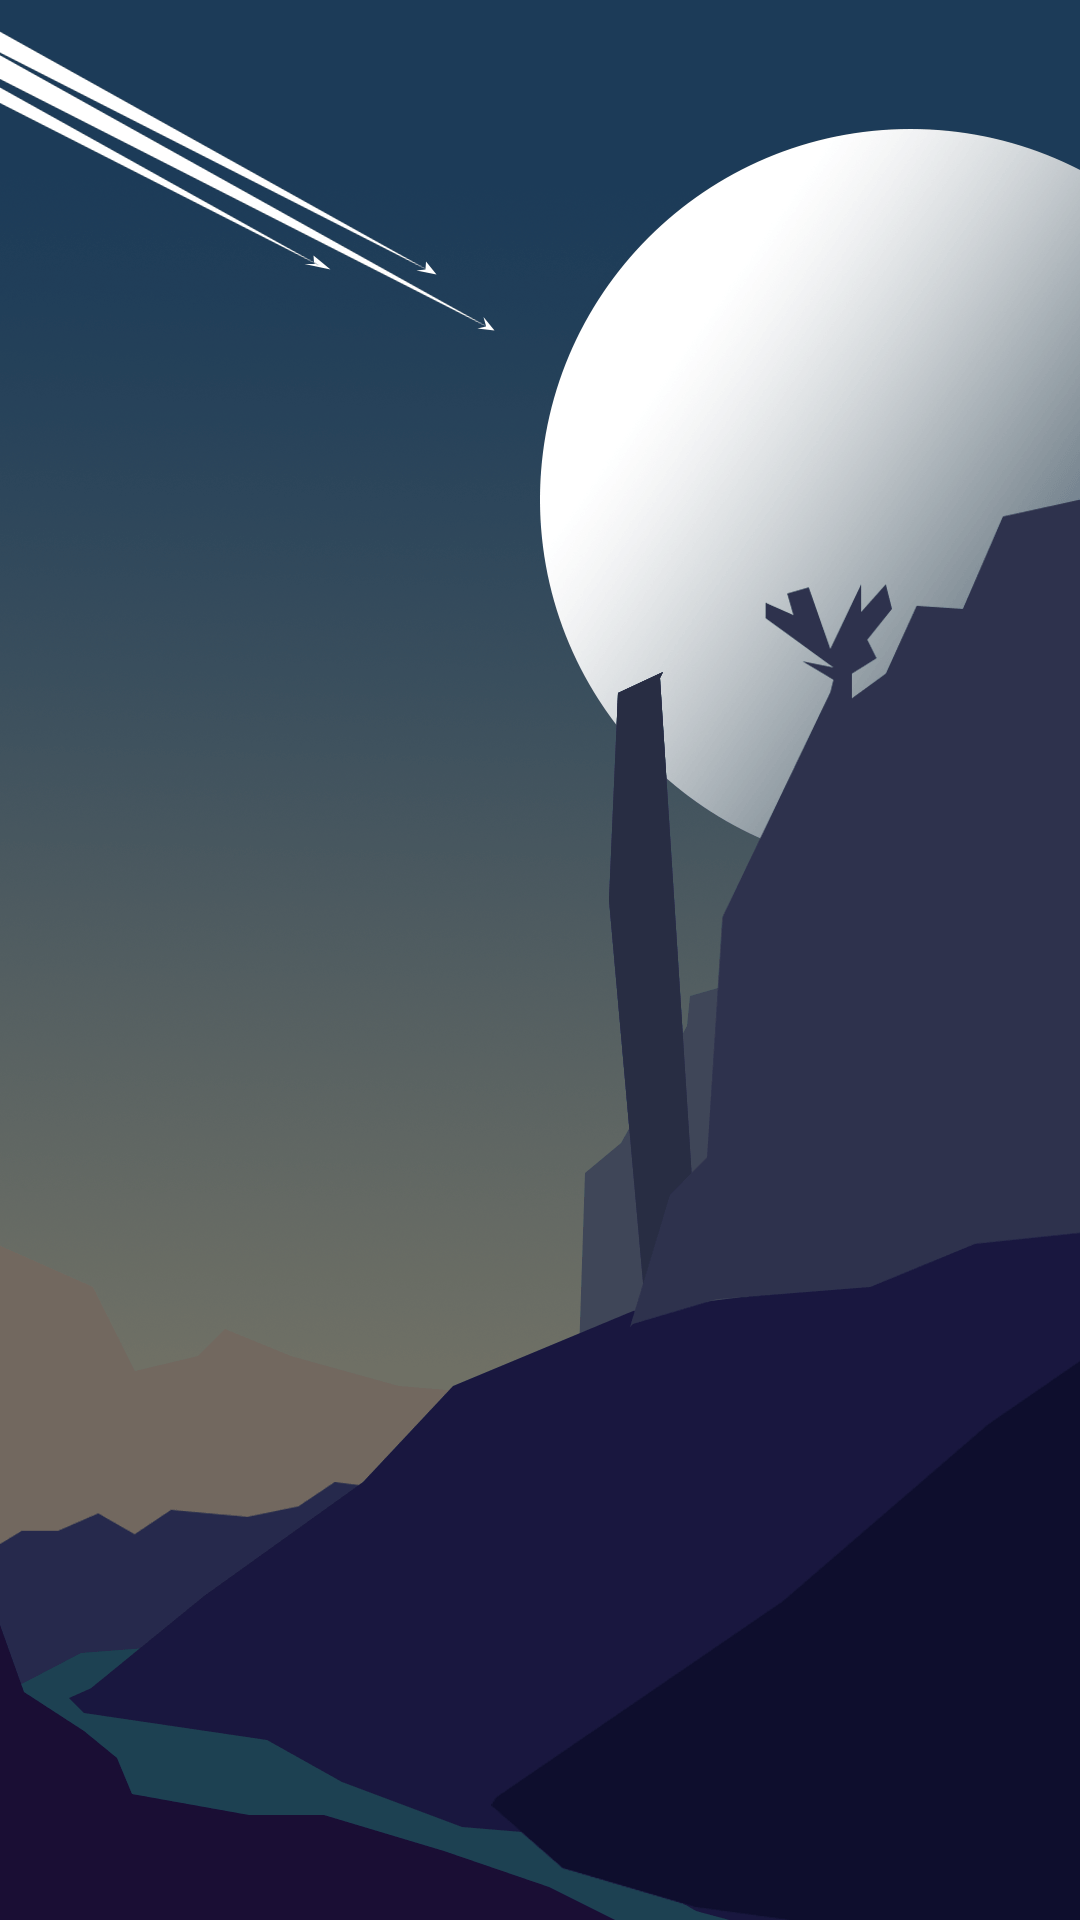 due to popular demand, here's another minimalist no mans sky